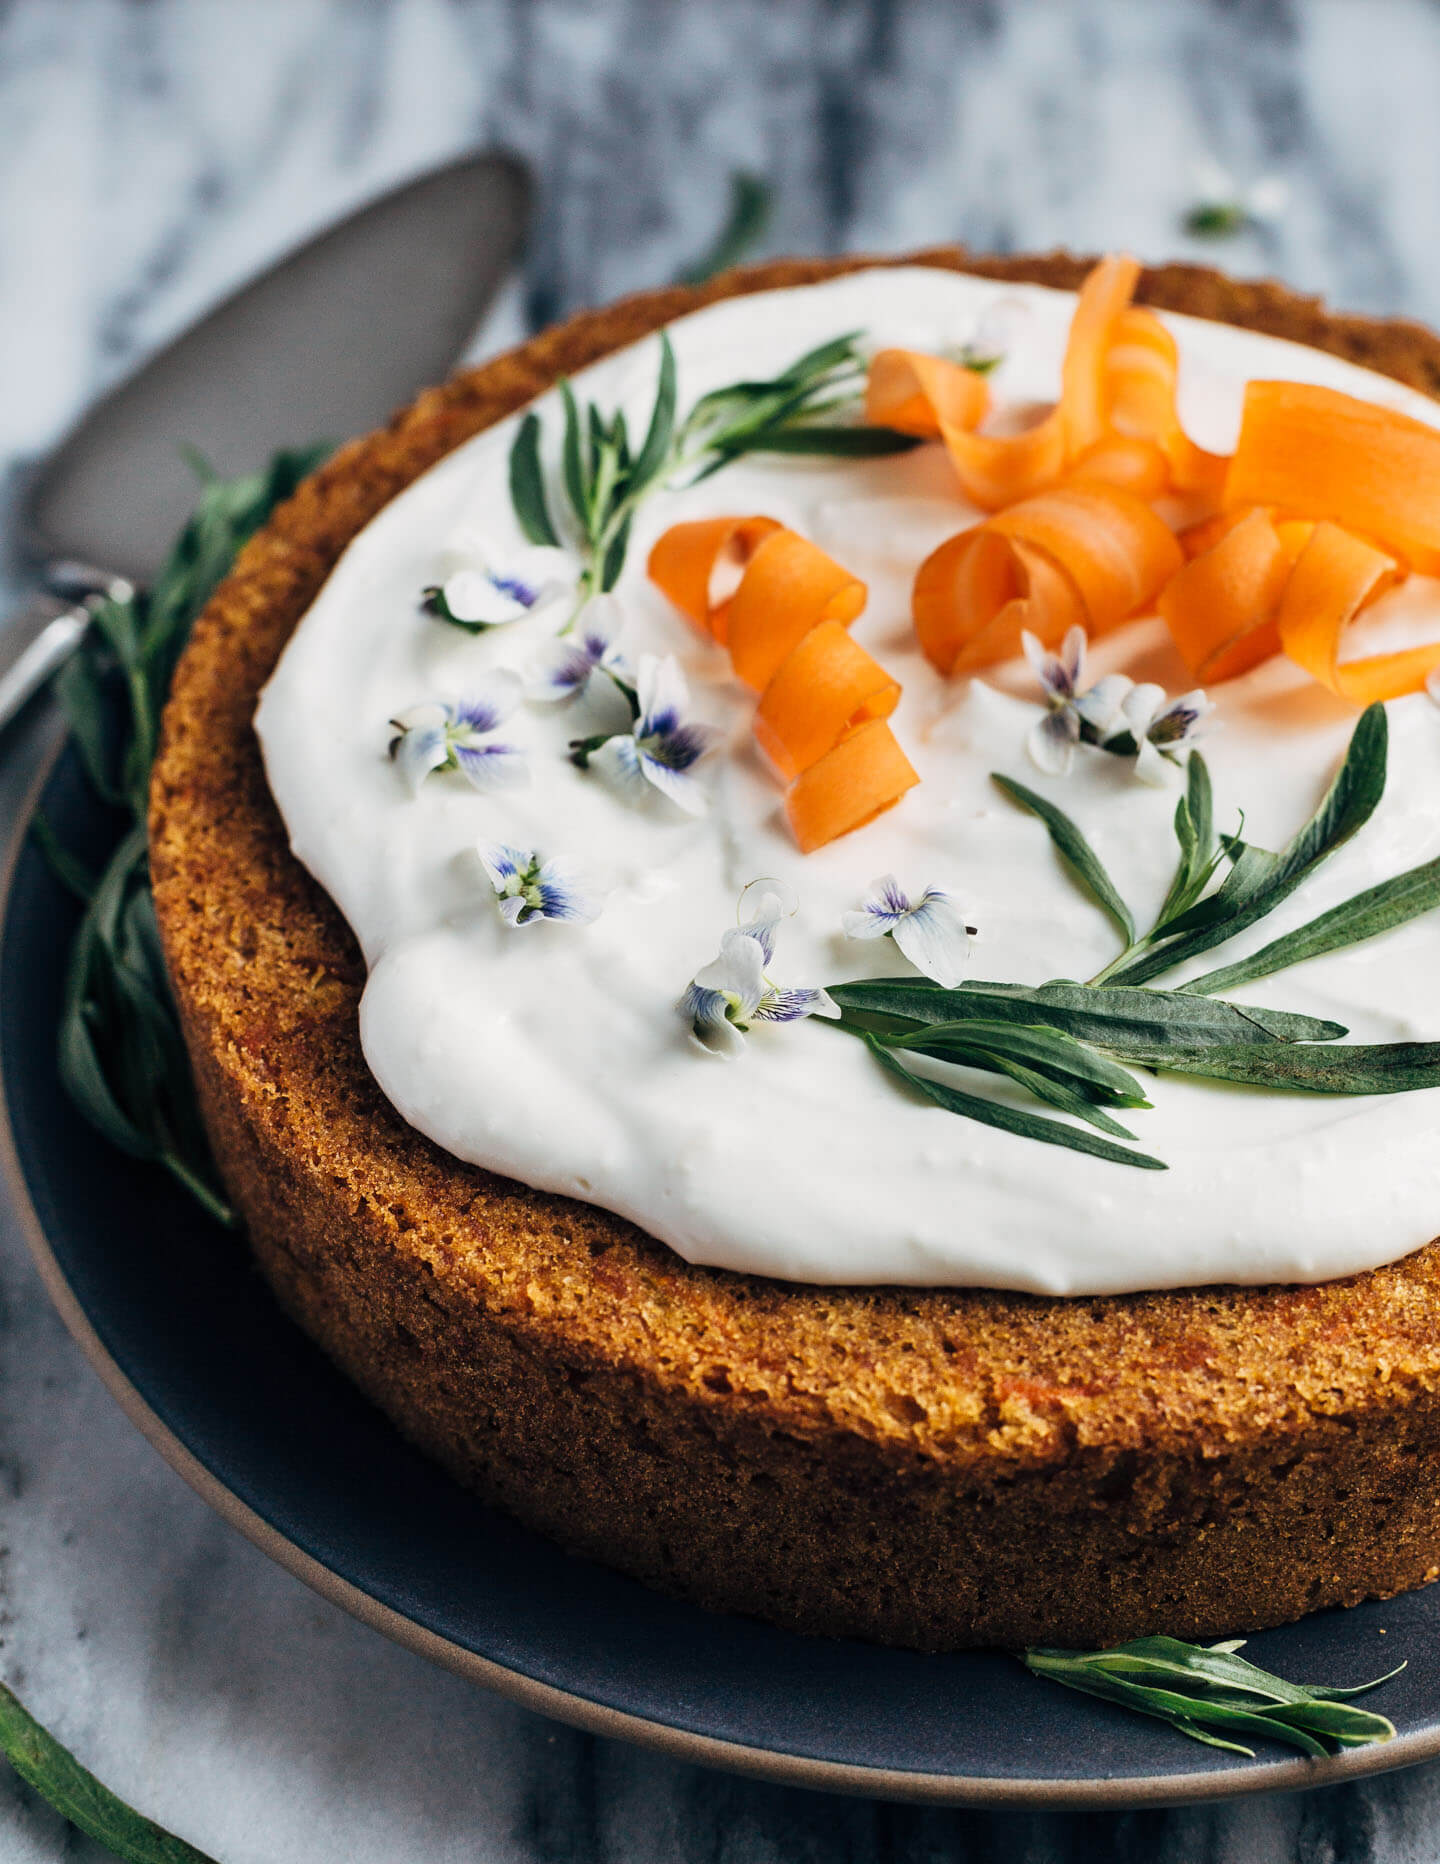 A simple olive oil carrot cake for spring celebrations! The tender, springy whole wheat crumb is suffused with nutty olive oil, fresh carrots, and orange zest. The cake is topped with an airy, lightly sweet yogurt and cream cheese frosting, carrot ribbons, tarragon, and edible flowers. 